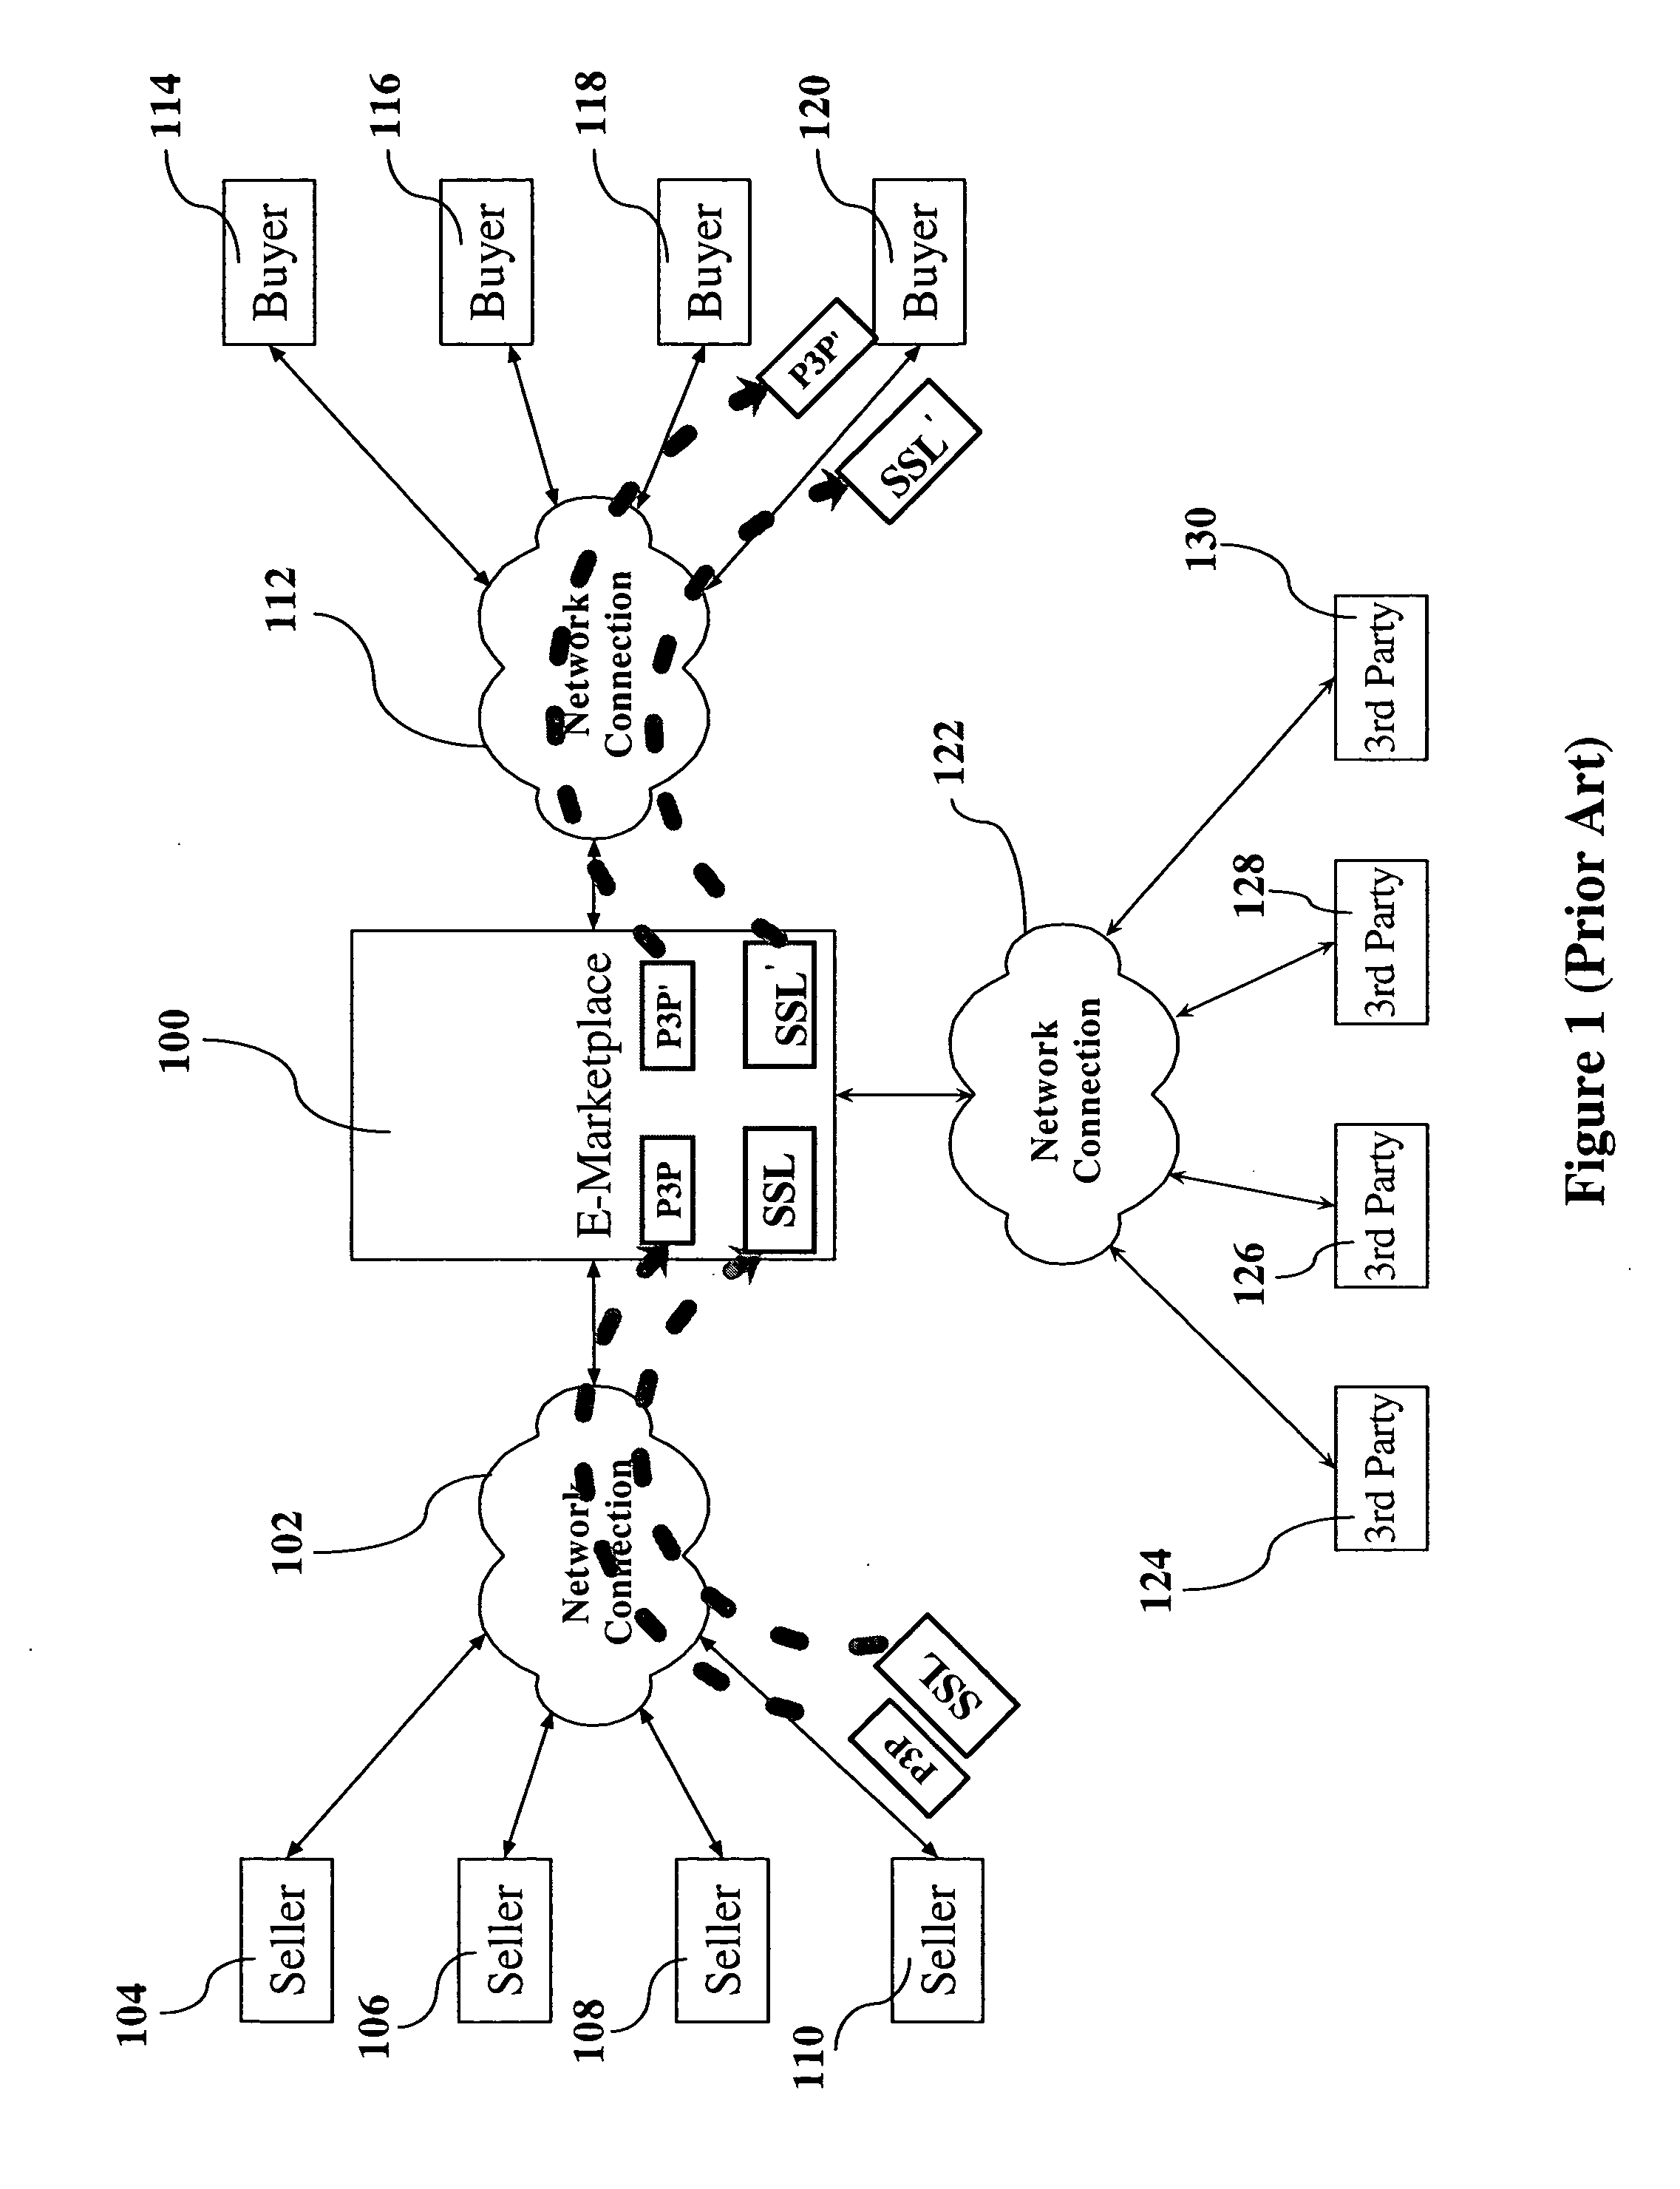 Method, system, and computer program product for digital verification of collected privacy policies in electronic transactions